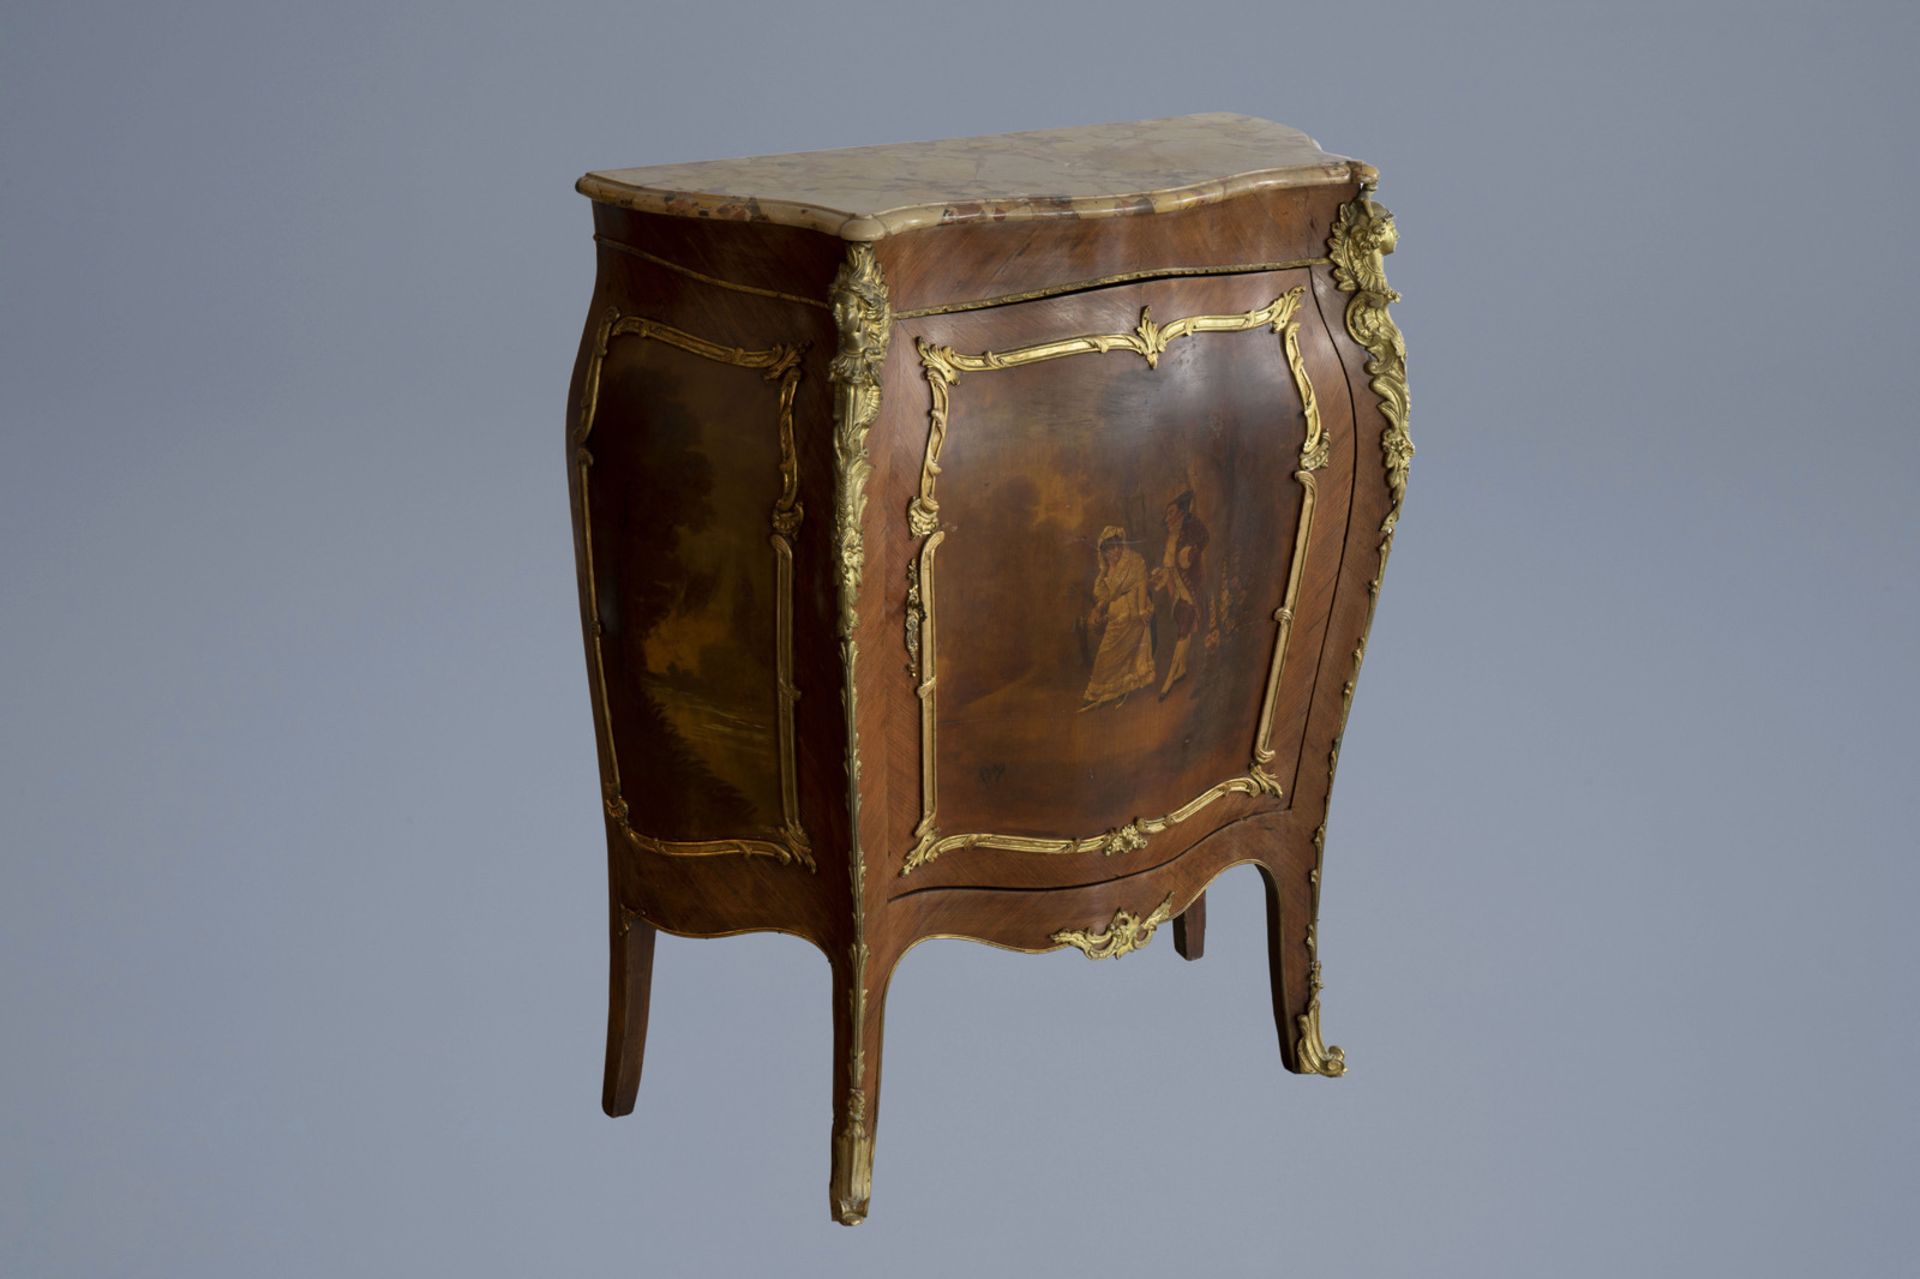 A French gilt bronze mounted Vernis Martin 'meuble d'appui' with brche d'Alep marble top, 19th/20th